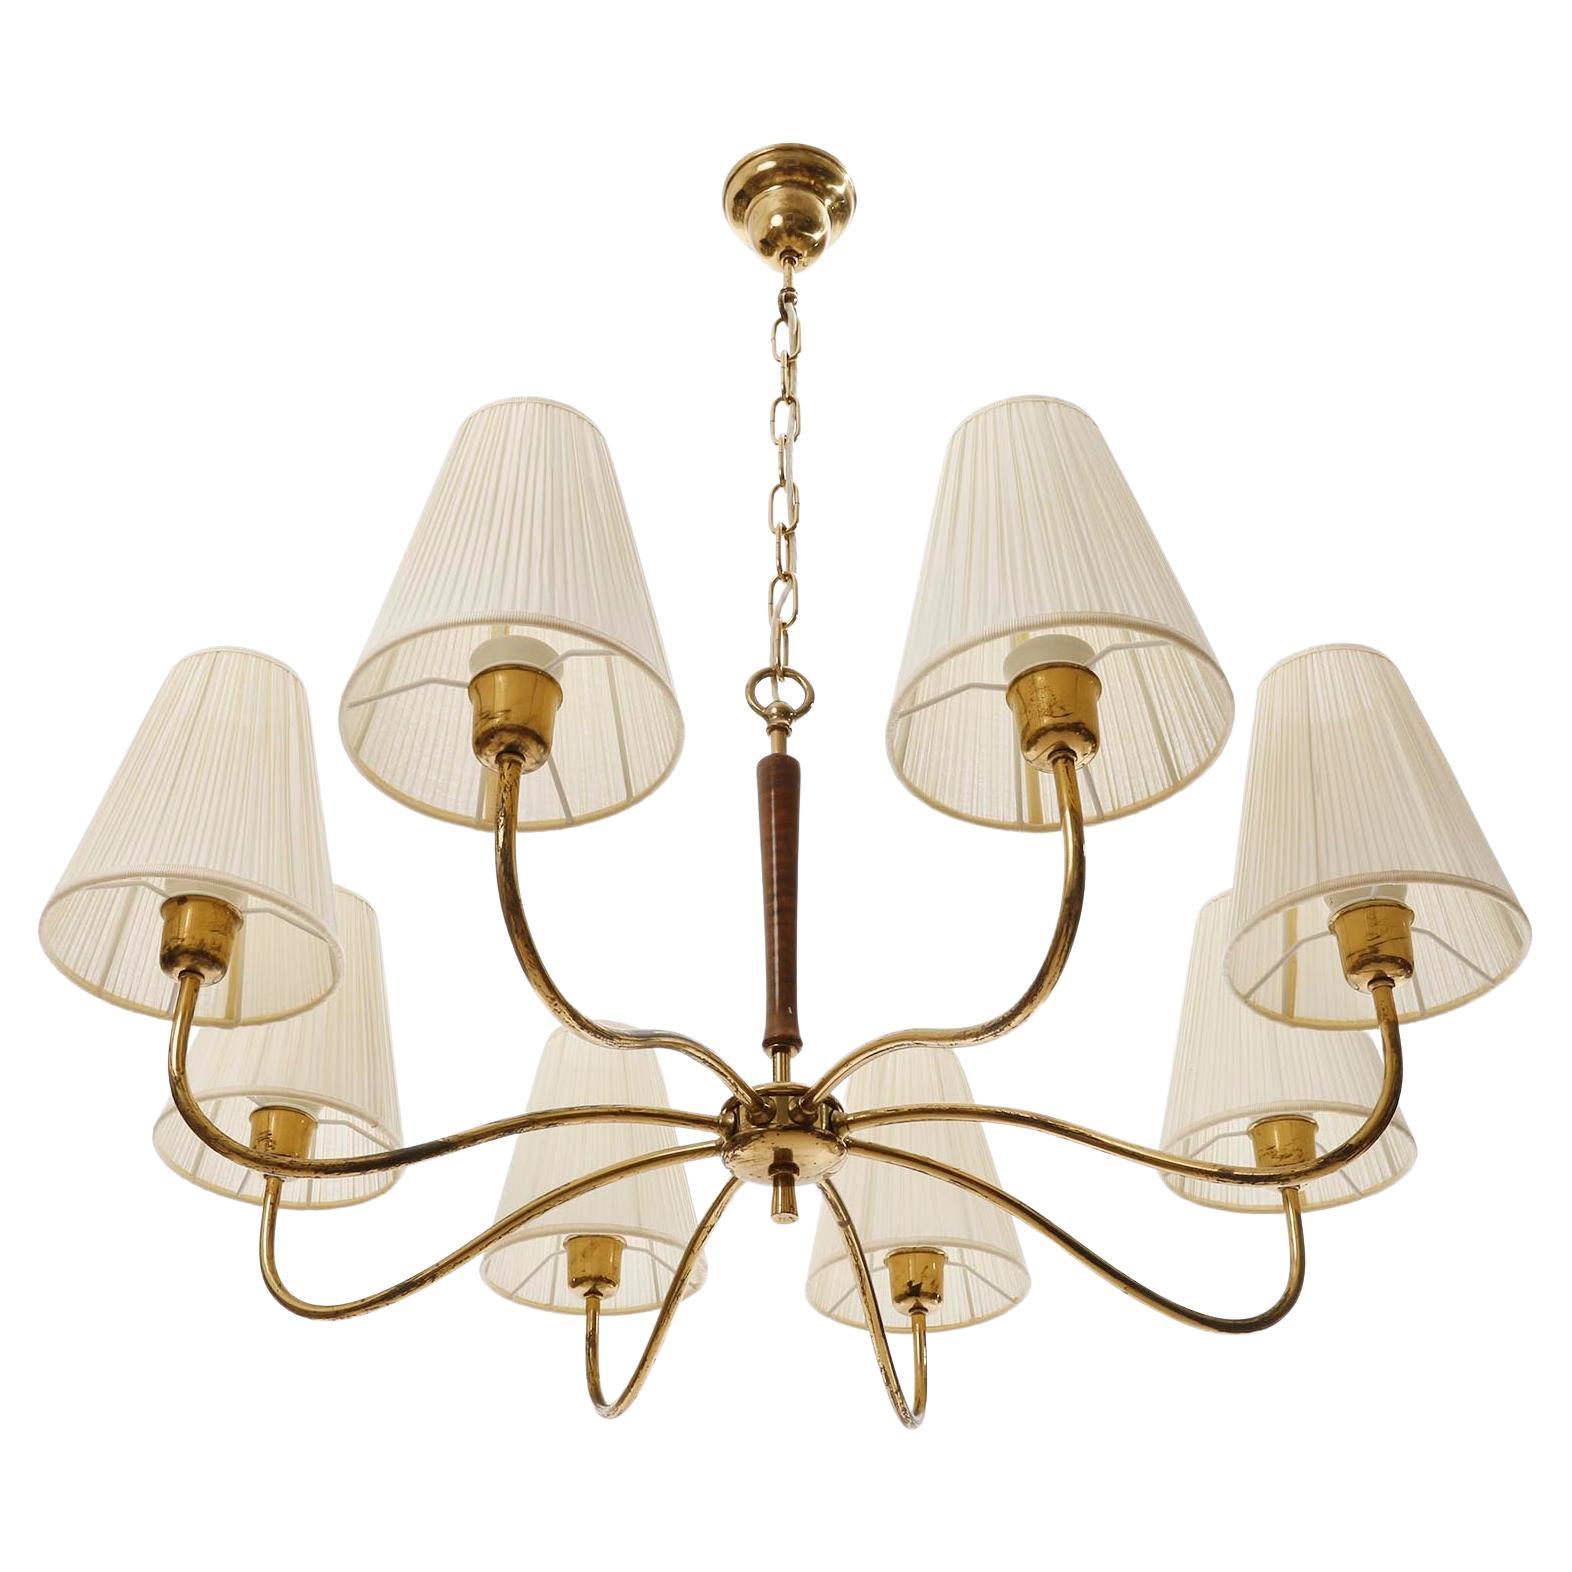 Polished Large Art Deco Chandelier Pendant Light, Wood Brass Cream Fabric Shades, 1930s For Sale